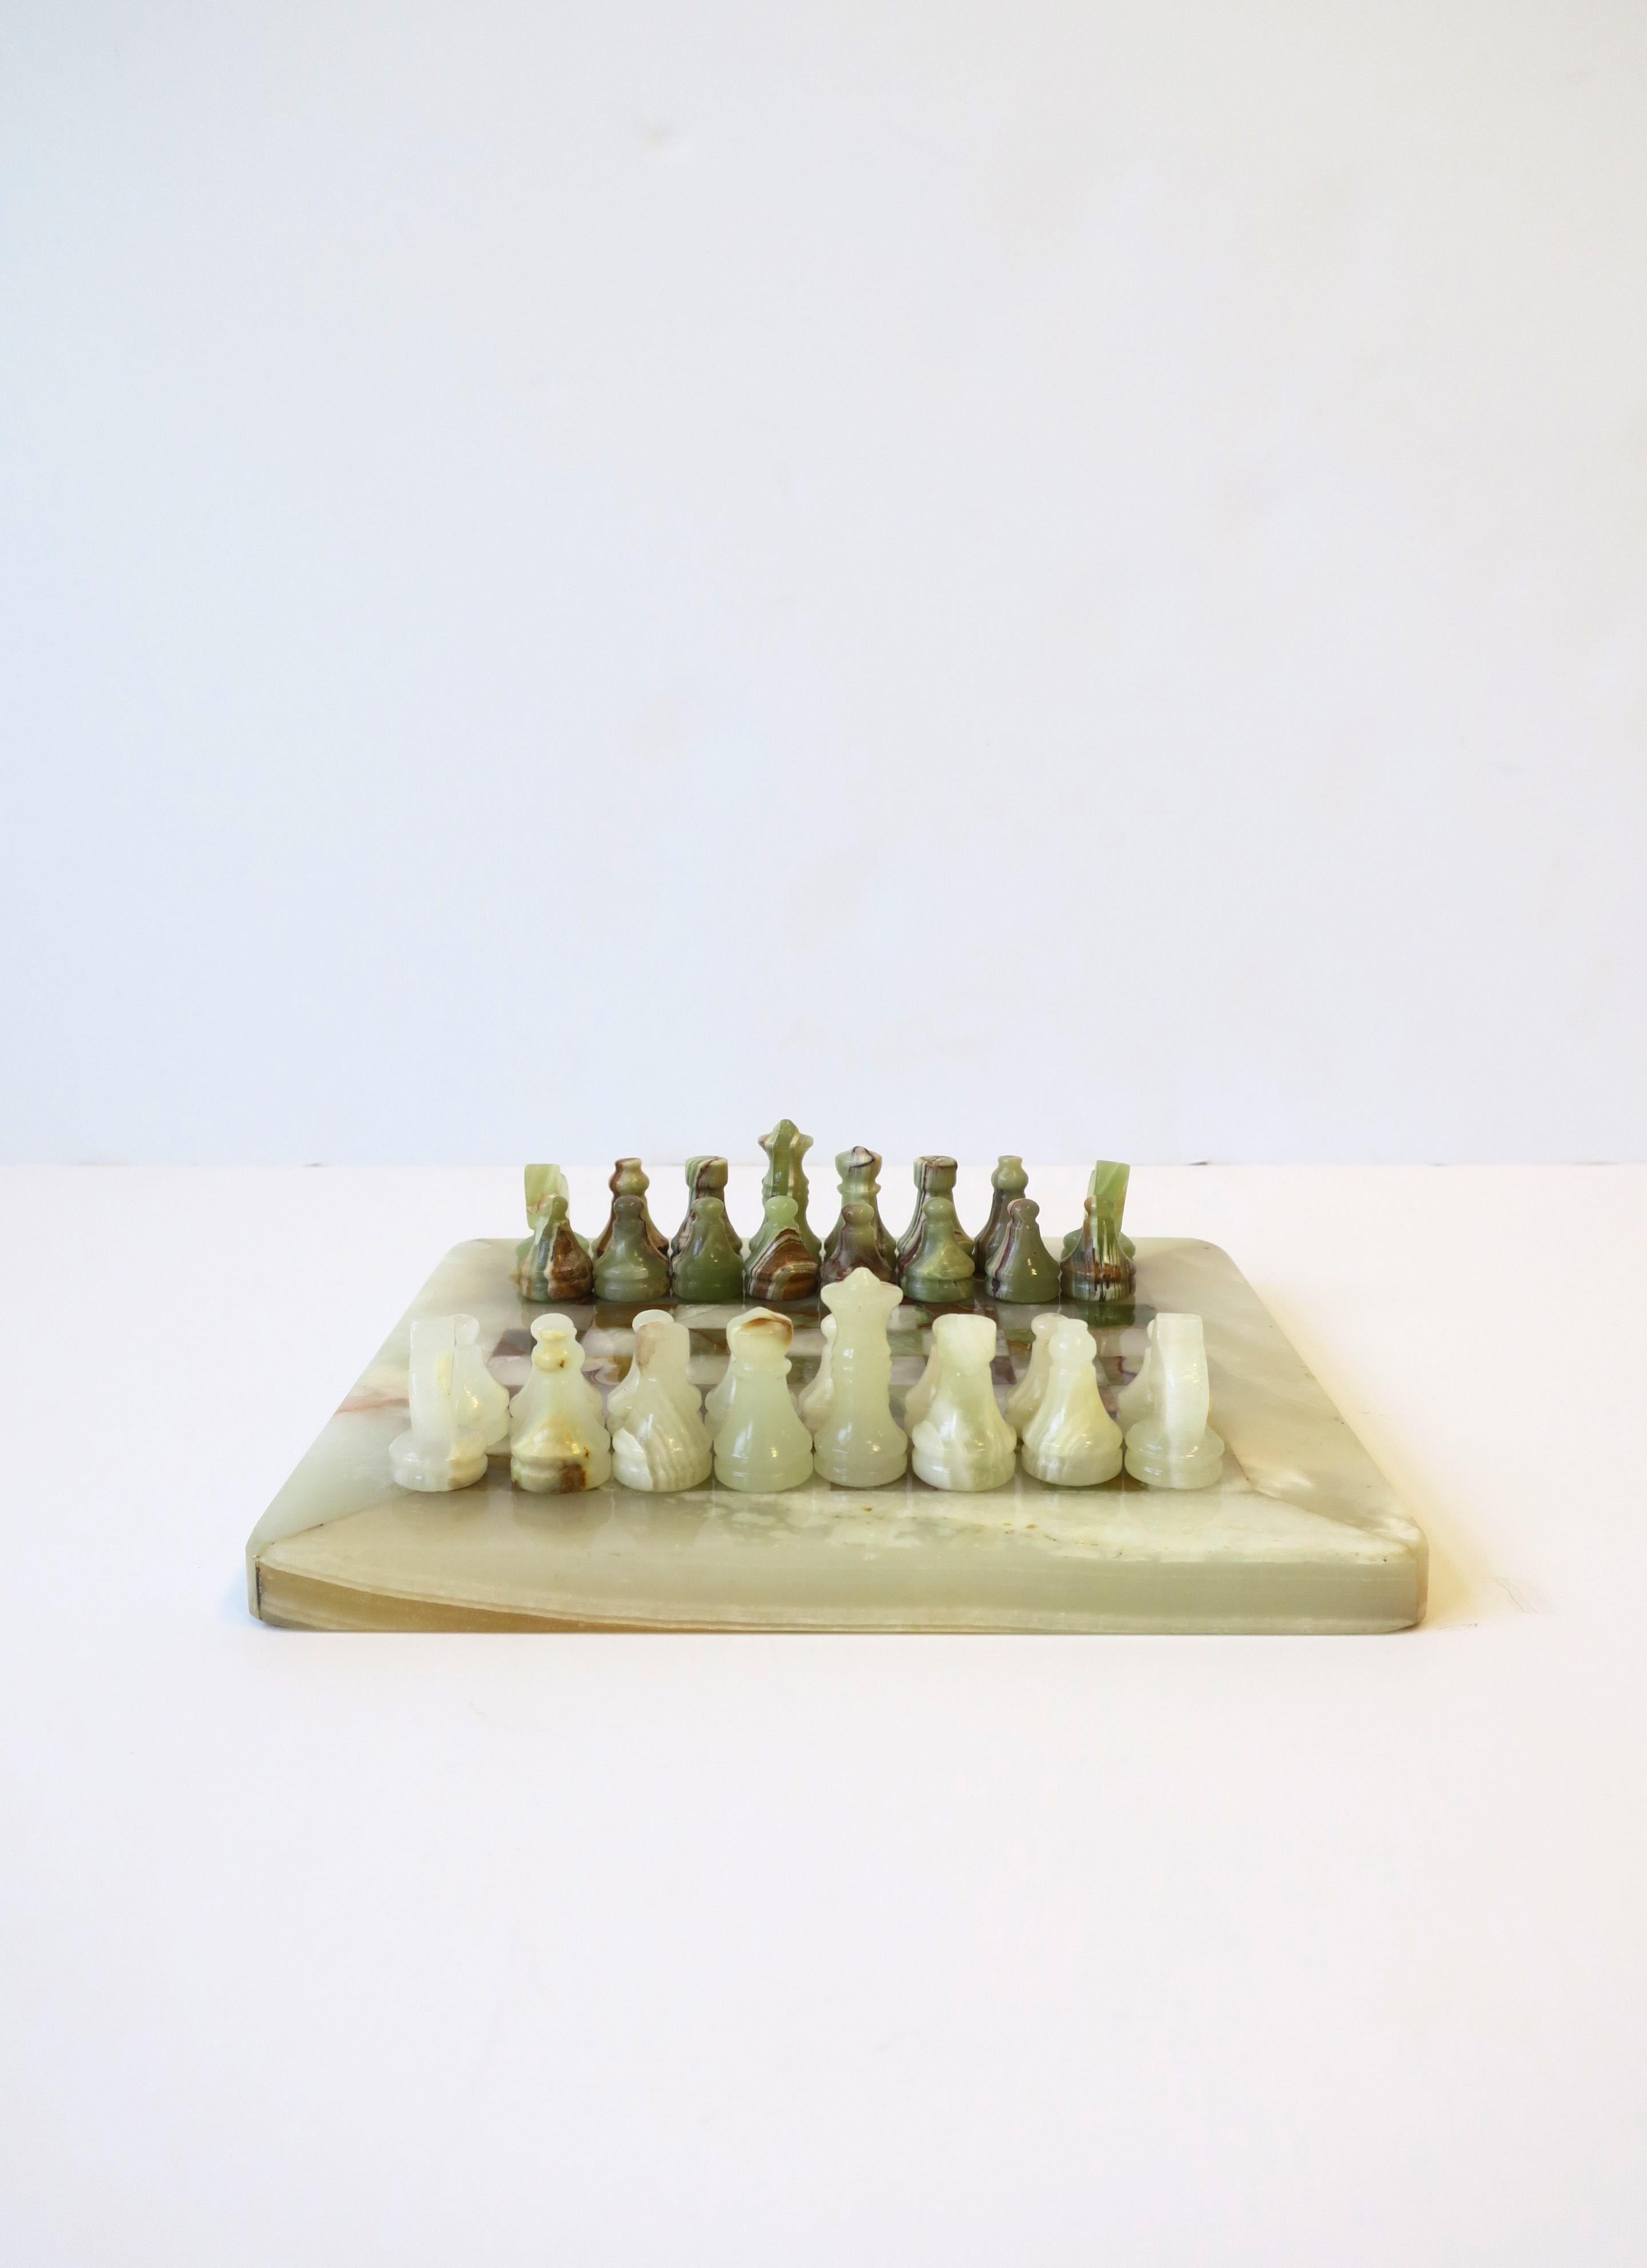 An onyx marble chess game set, circa mid to late-20th century, 1970s. Game set is hand-crafted. Game board is off-white cream and green onyx marble hues. Set includes one board and 32 pieces. Set is relatively small and a convenient size. Board